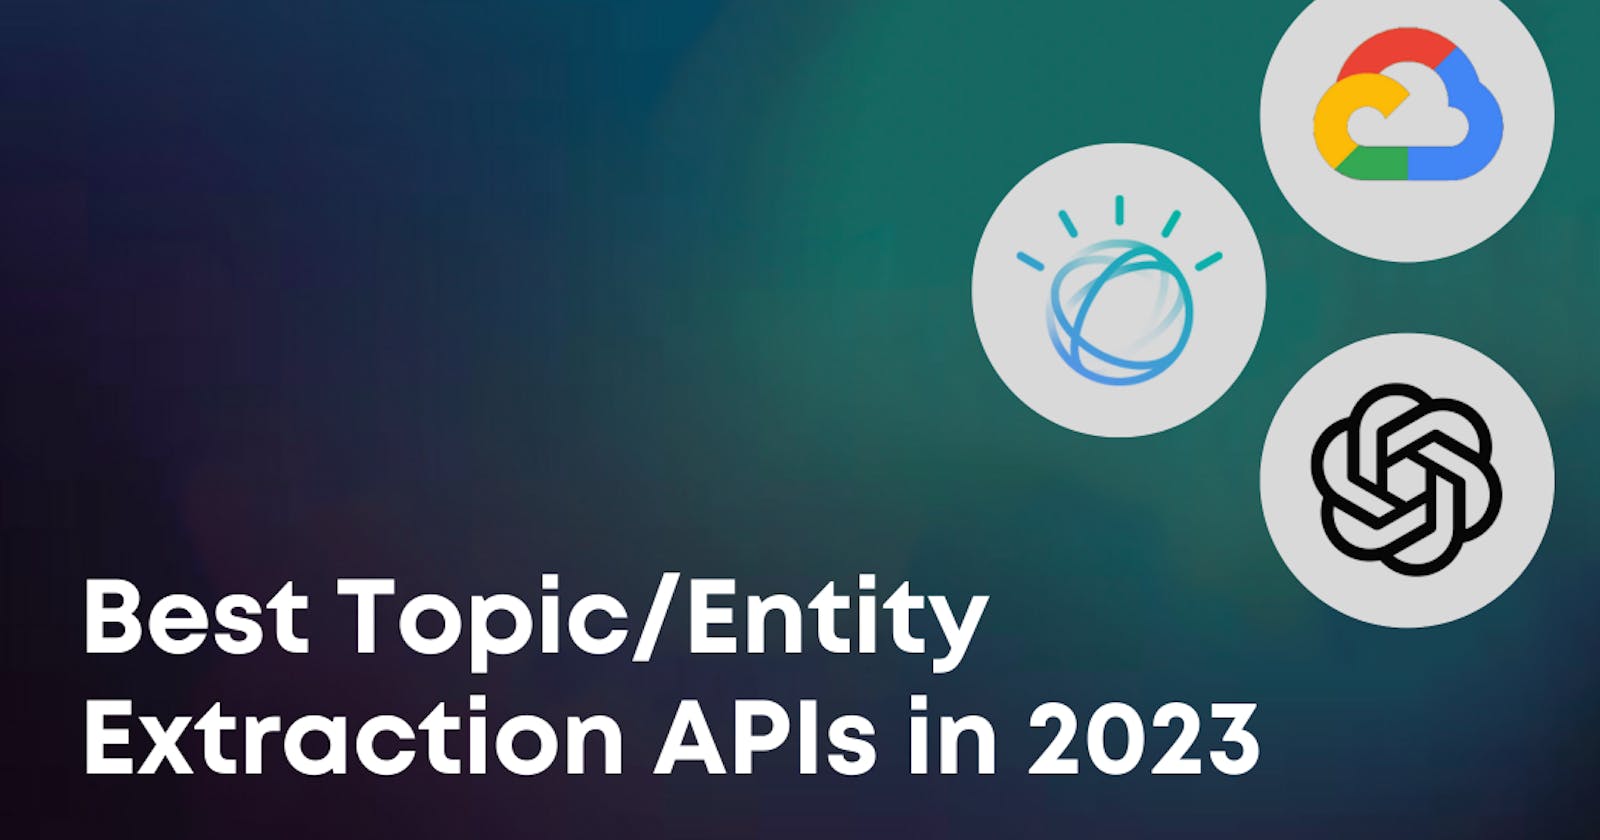 Best Topic/Entity Extraction APIs in 2023